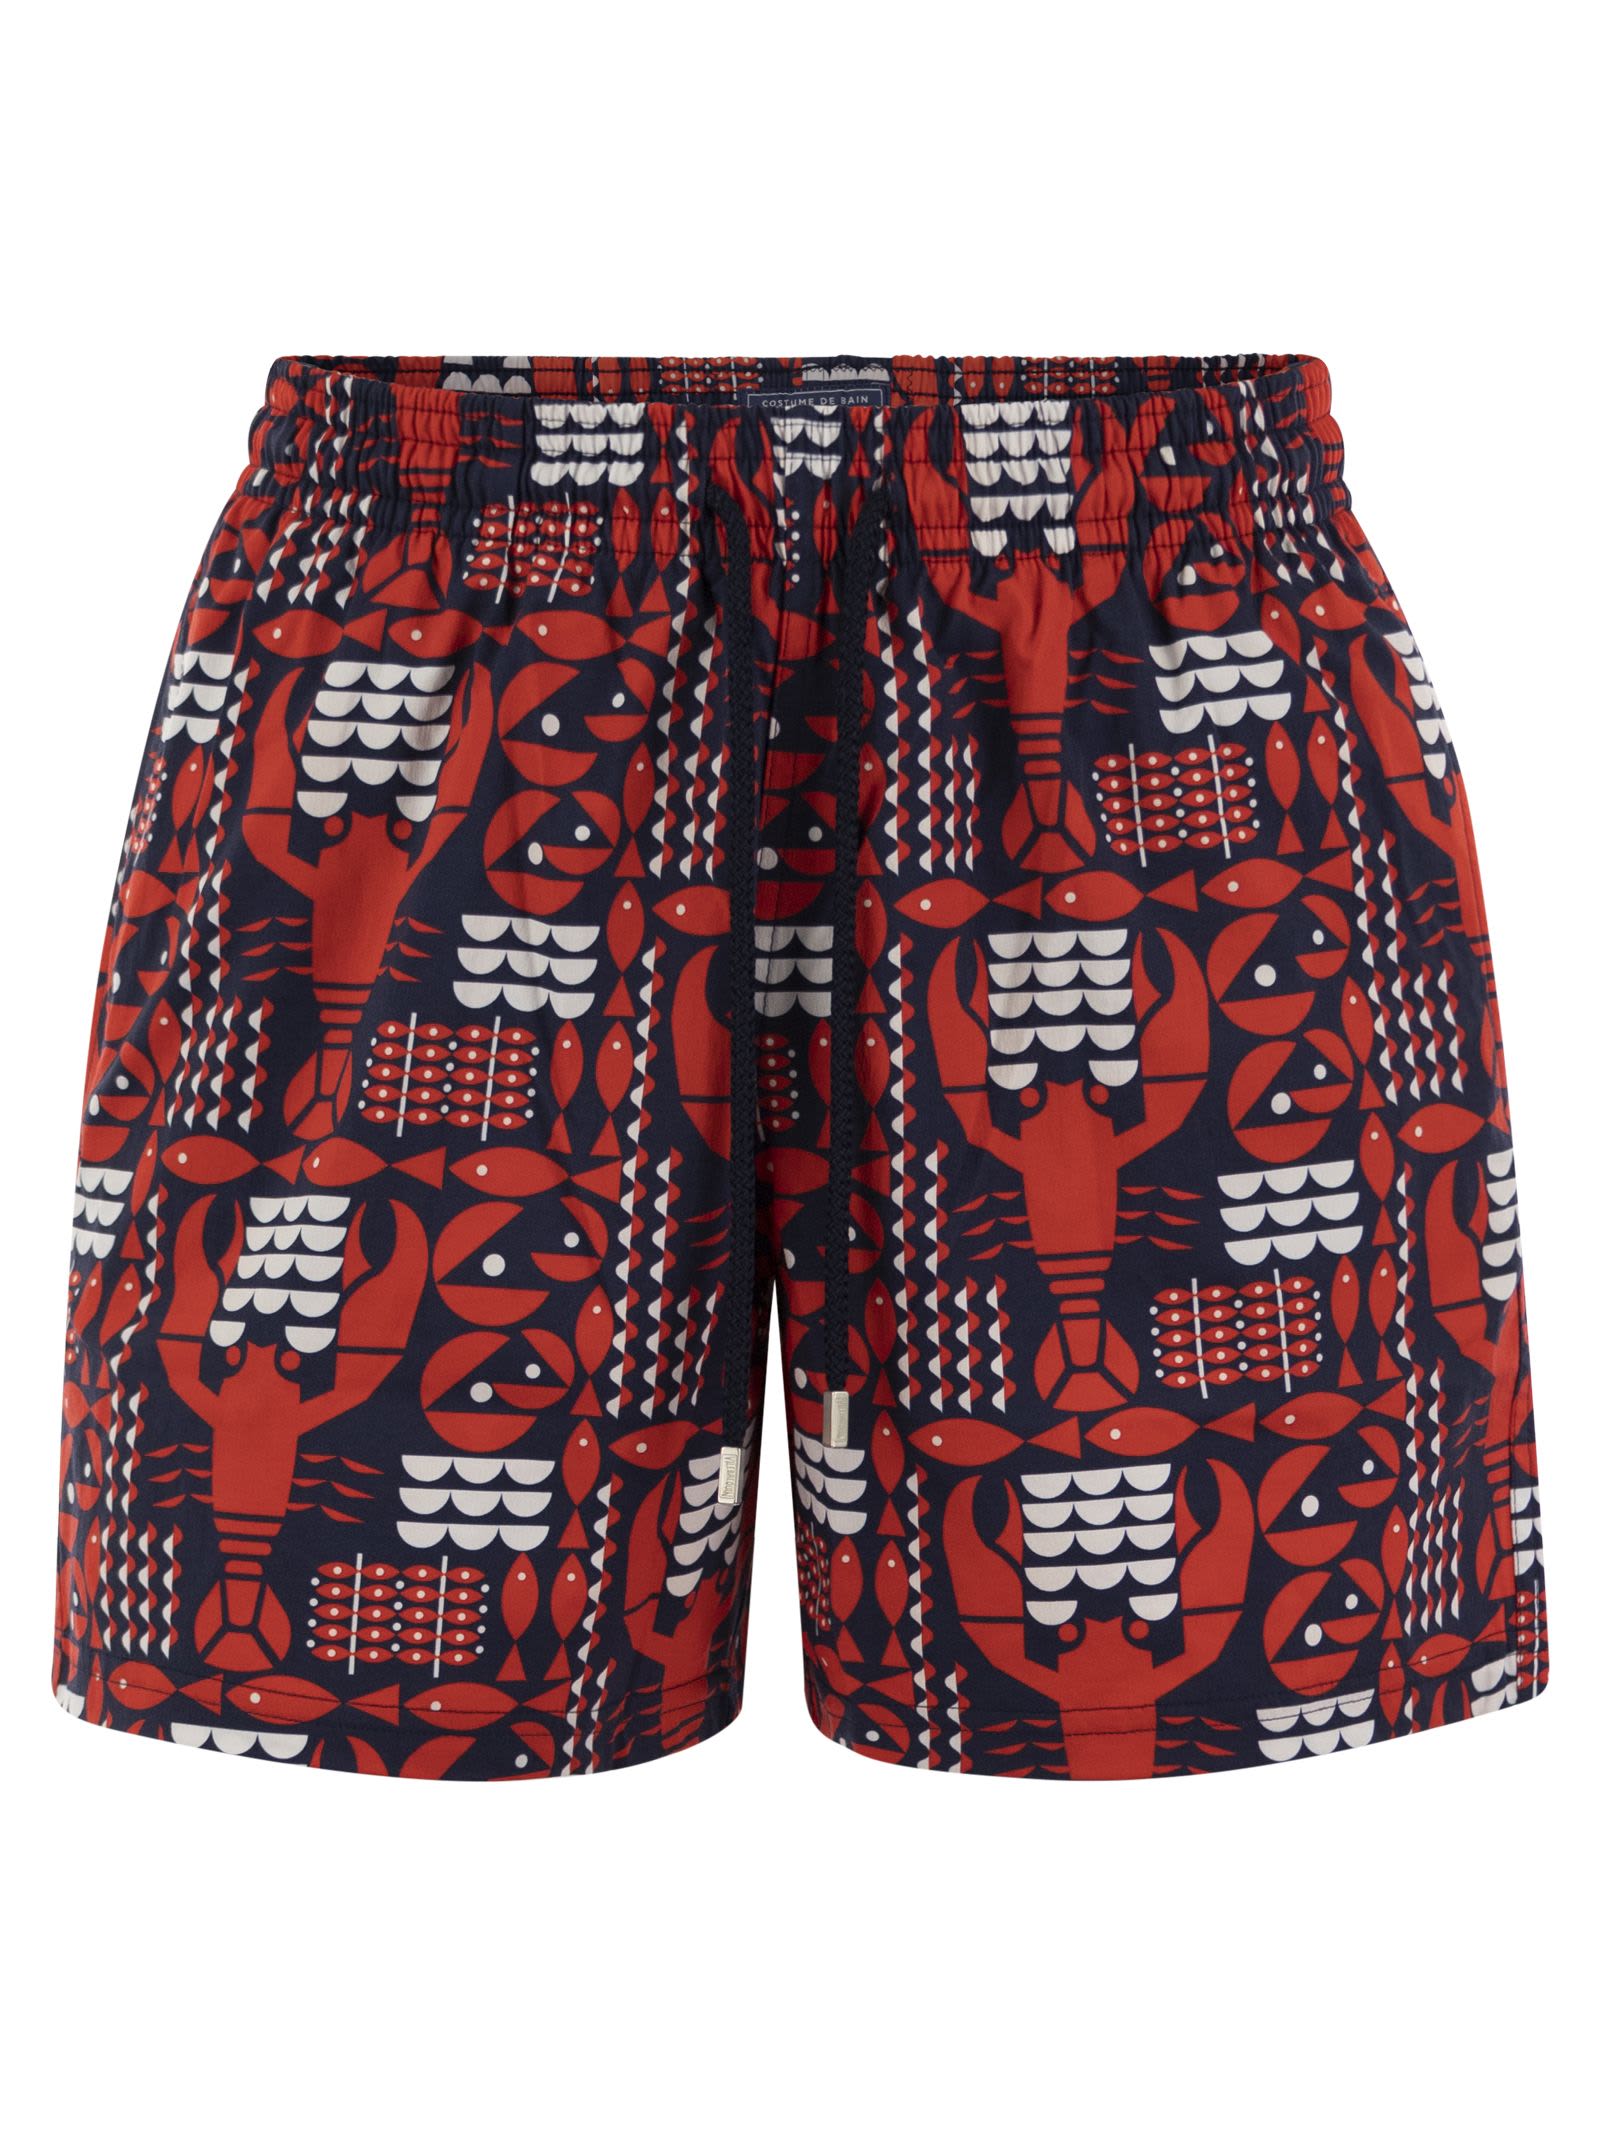 Stretch Beach Shorts With Patterned Print